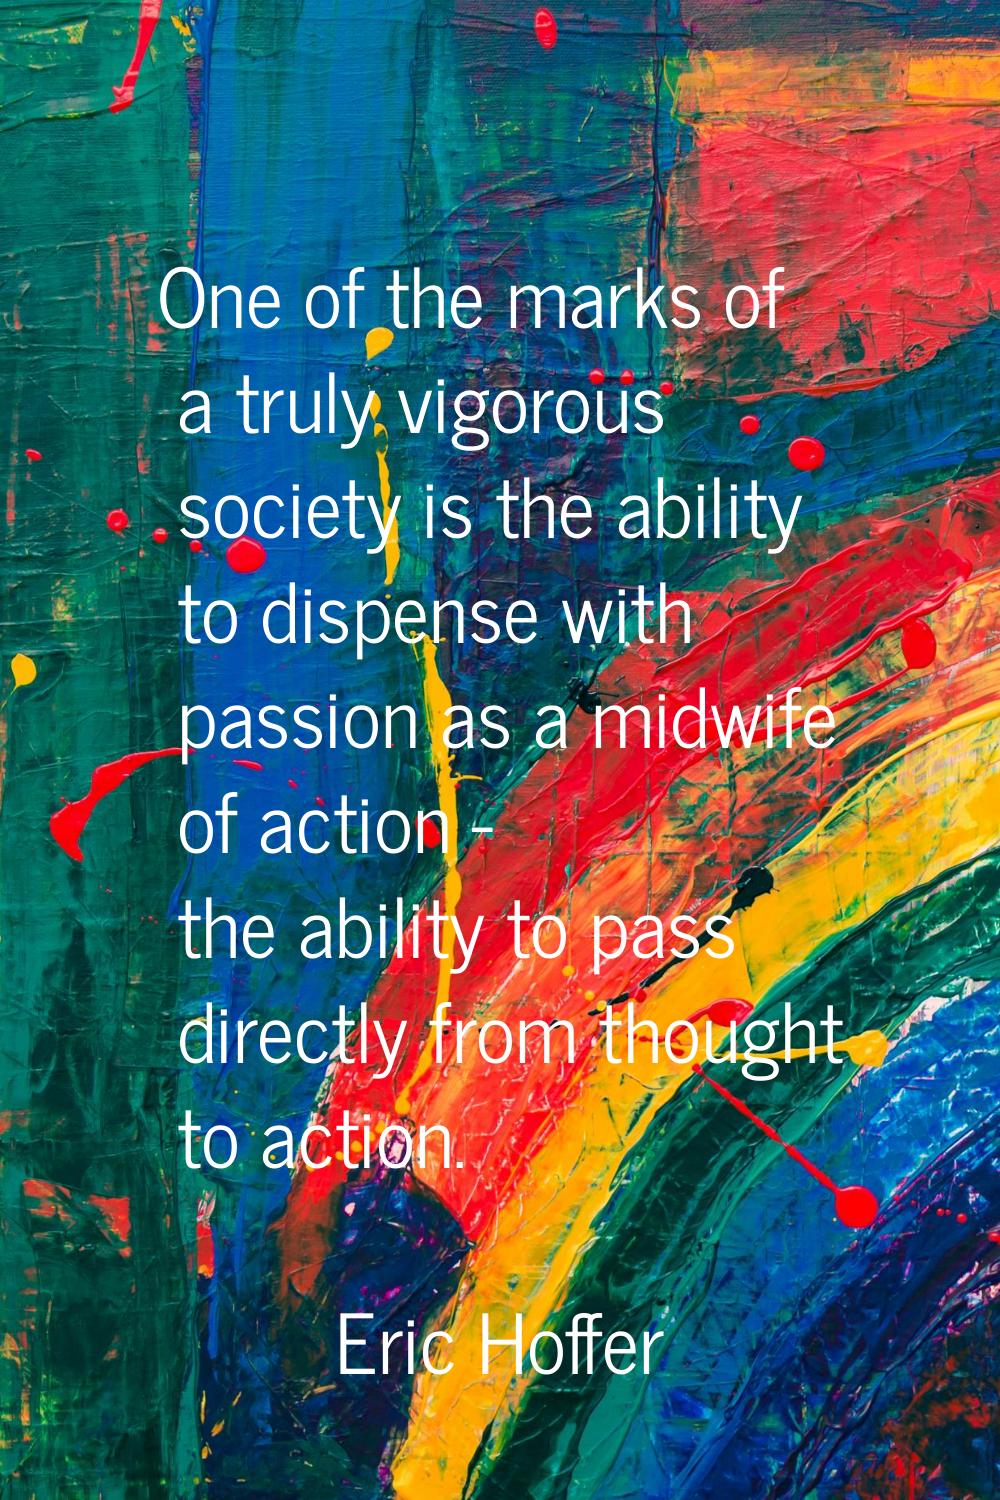 One of the marks of a truly vigorous society is the ability to dispense with passion as a midwife o